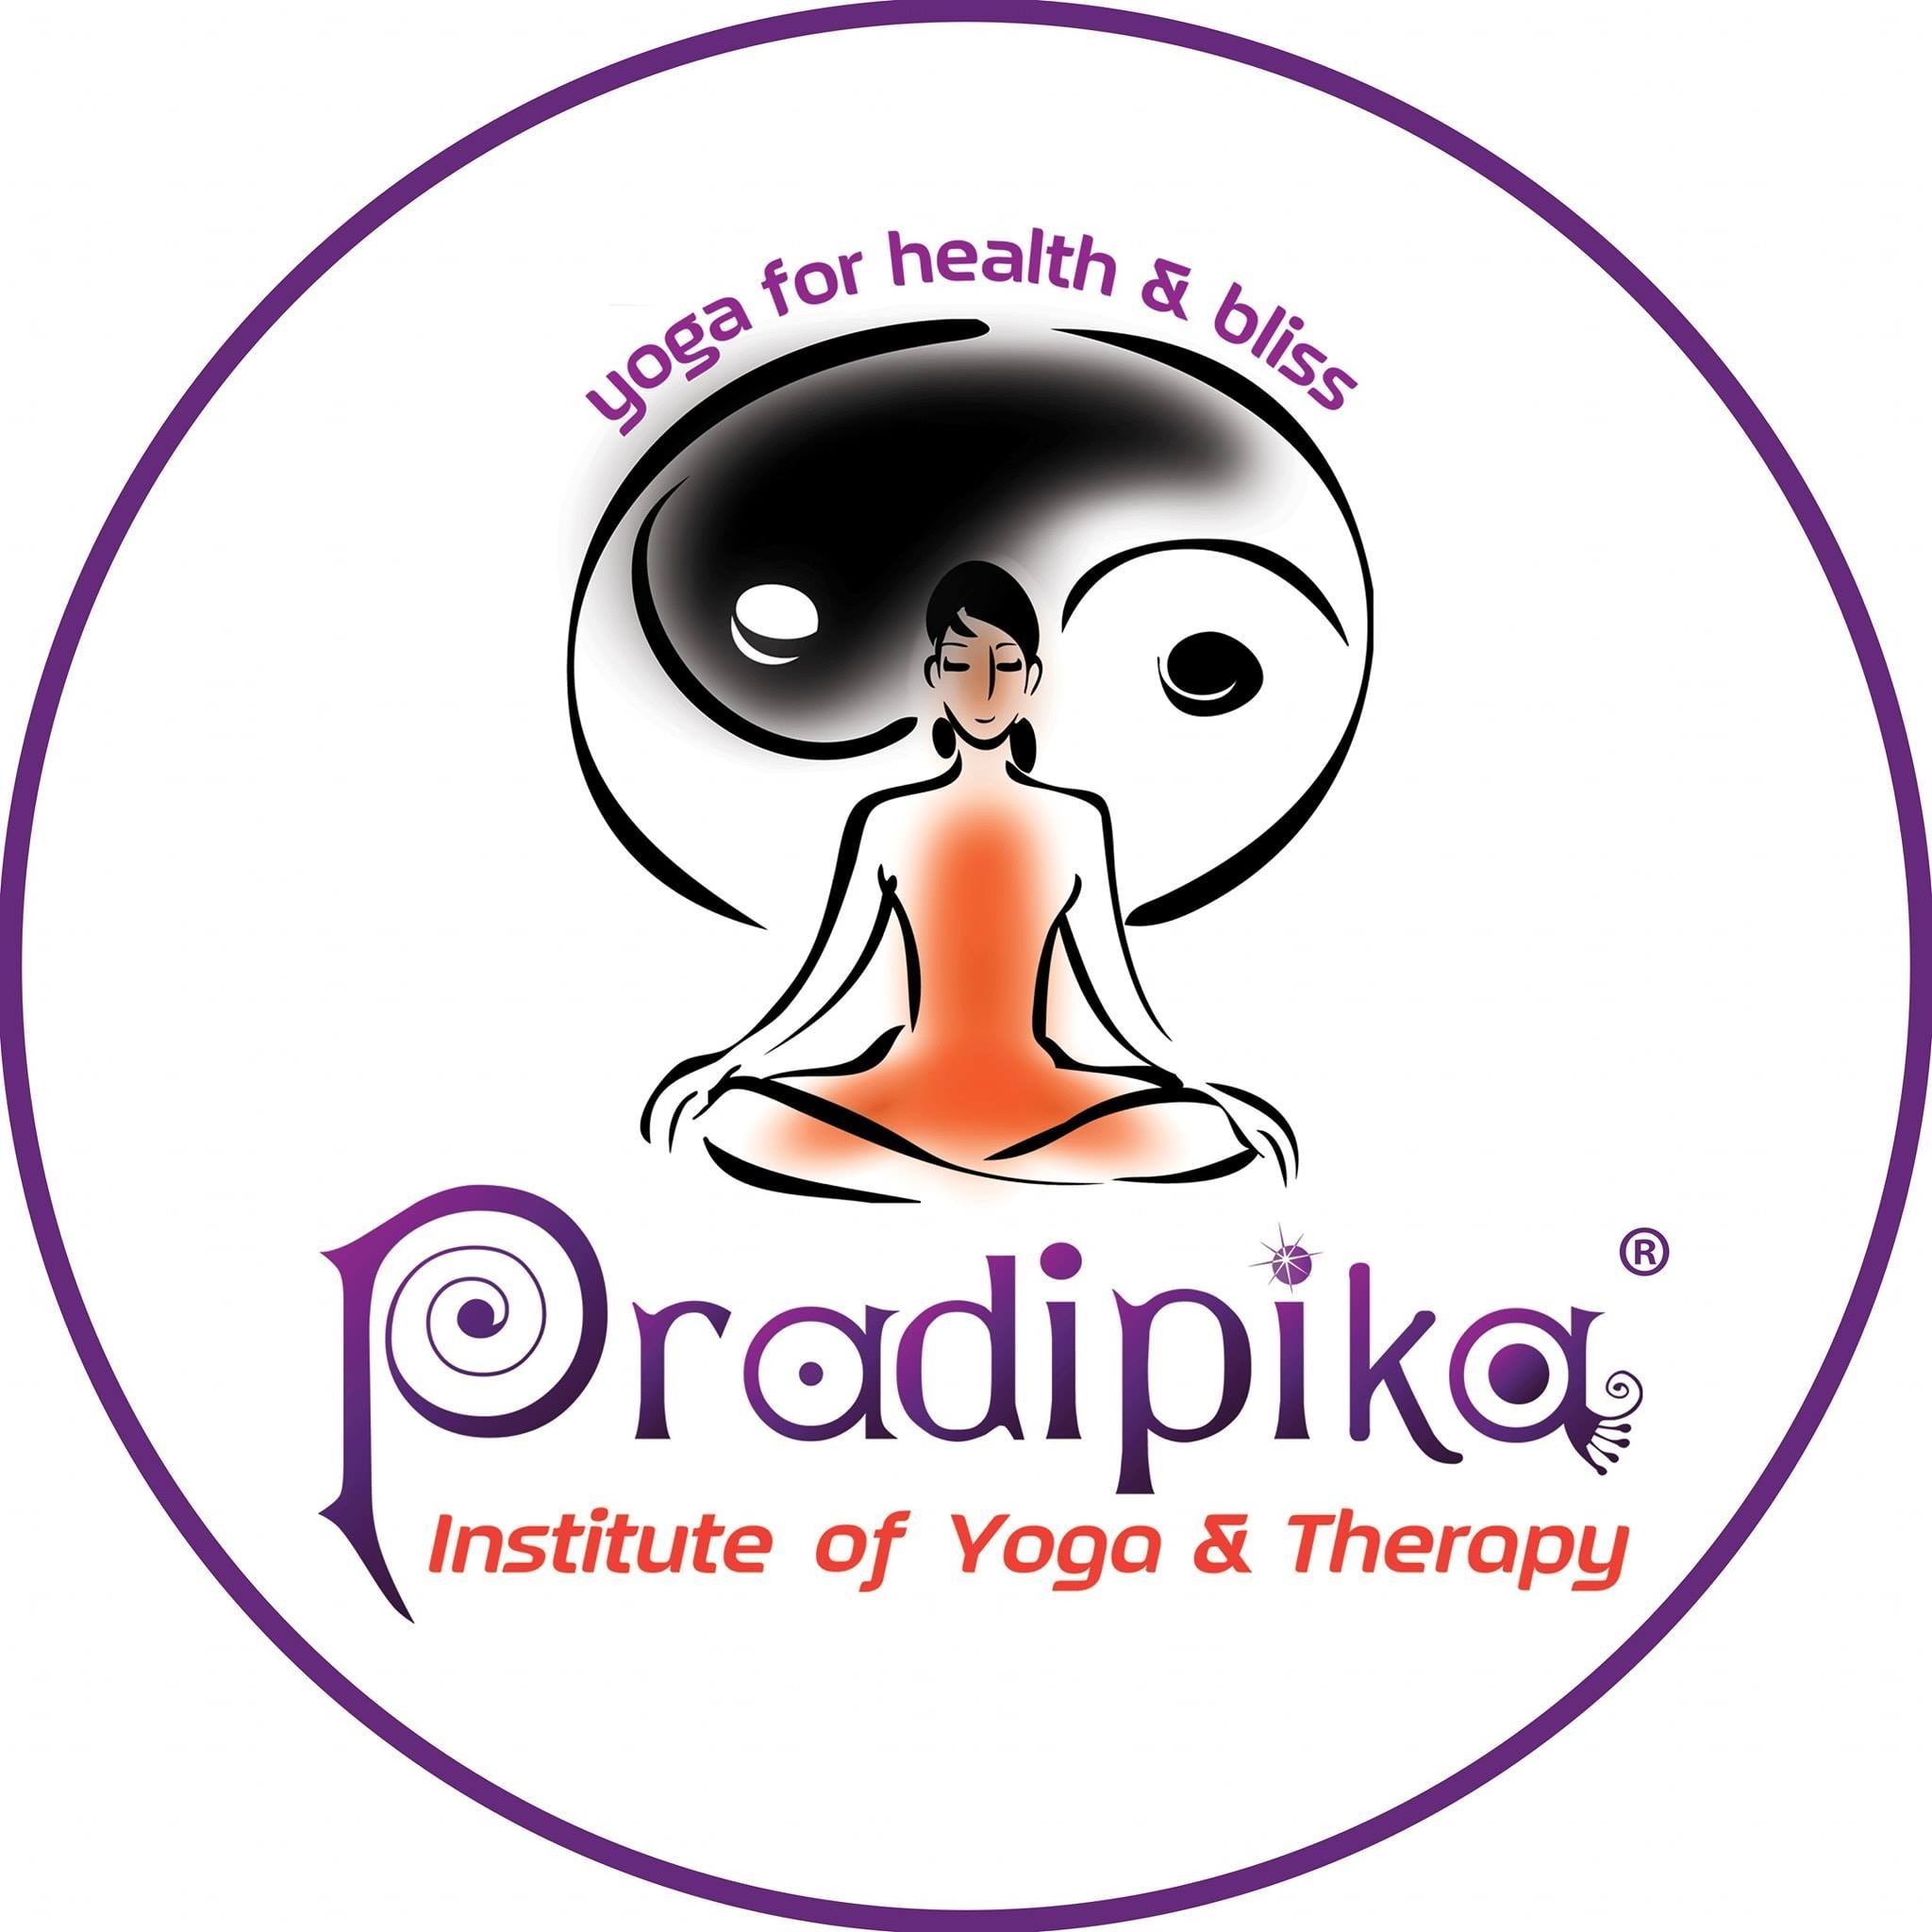 Pradipika Institute of Yoga and Therapy Image